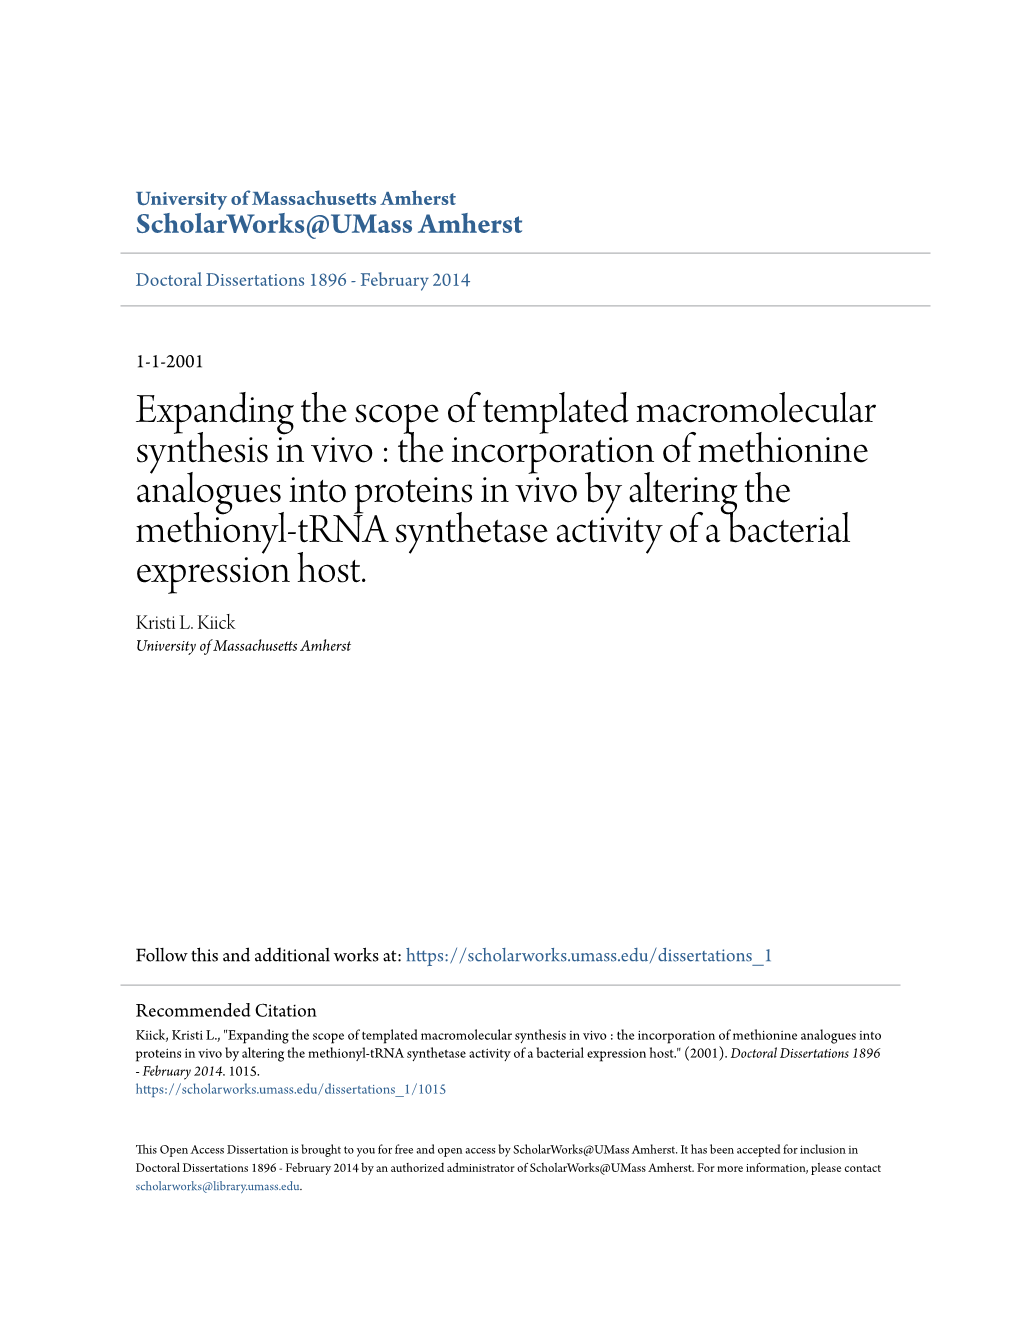 Expanding the Scope of Templated